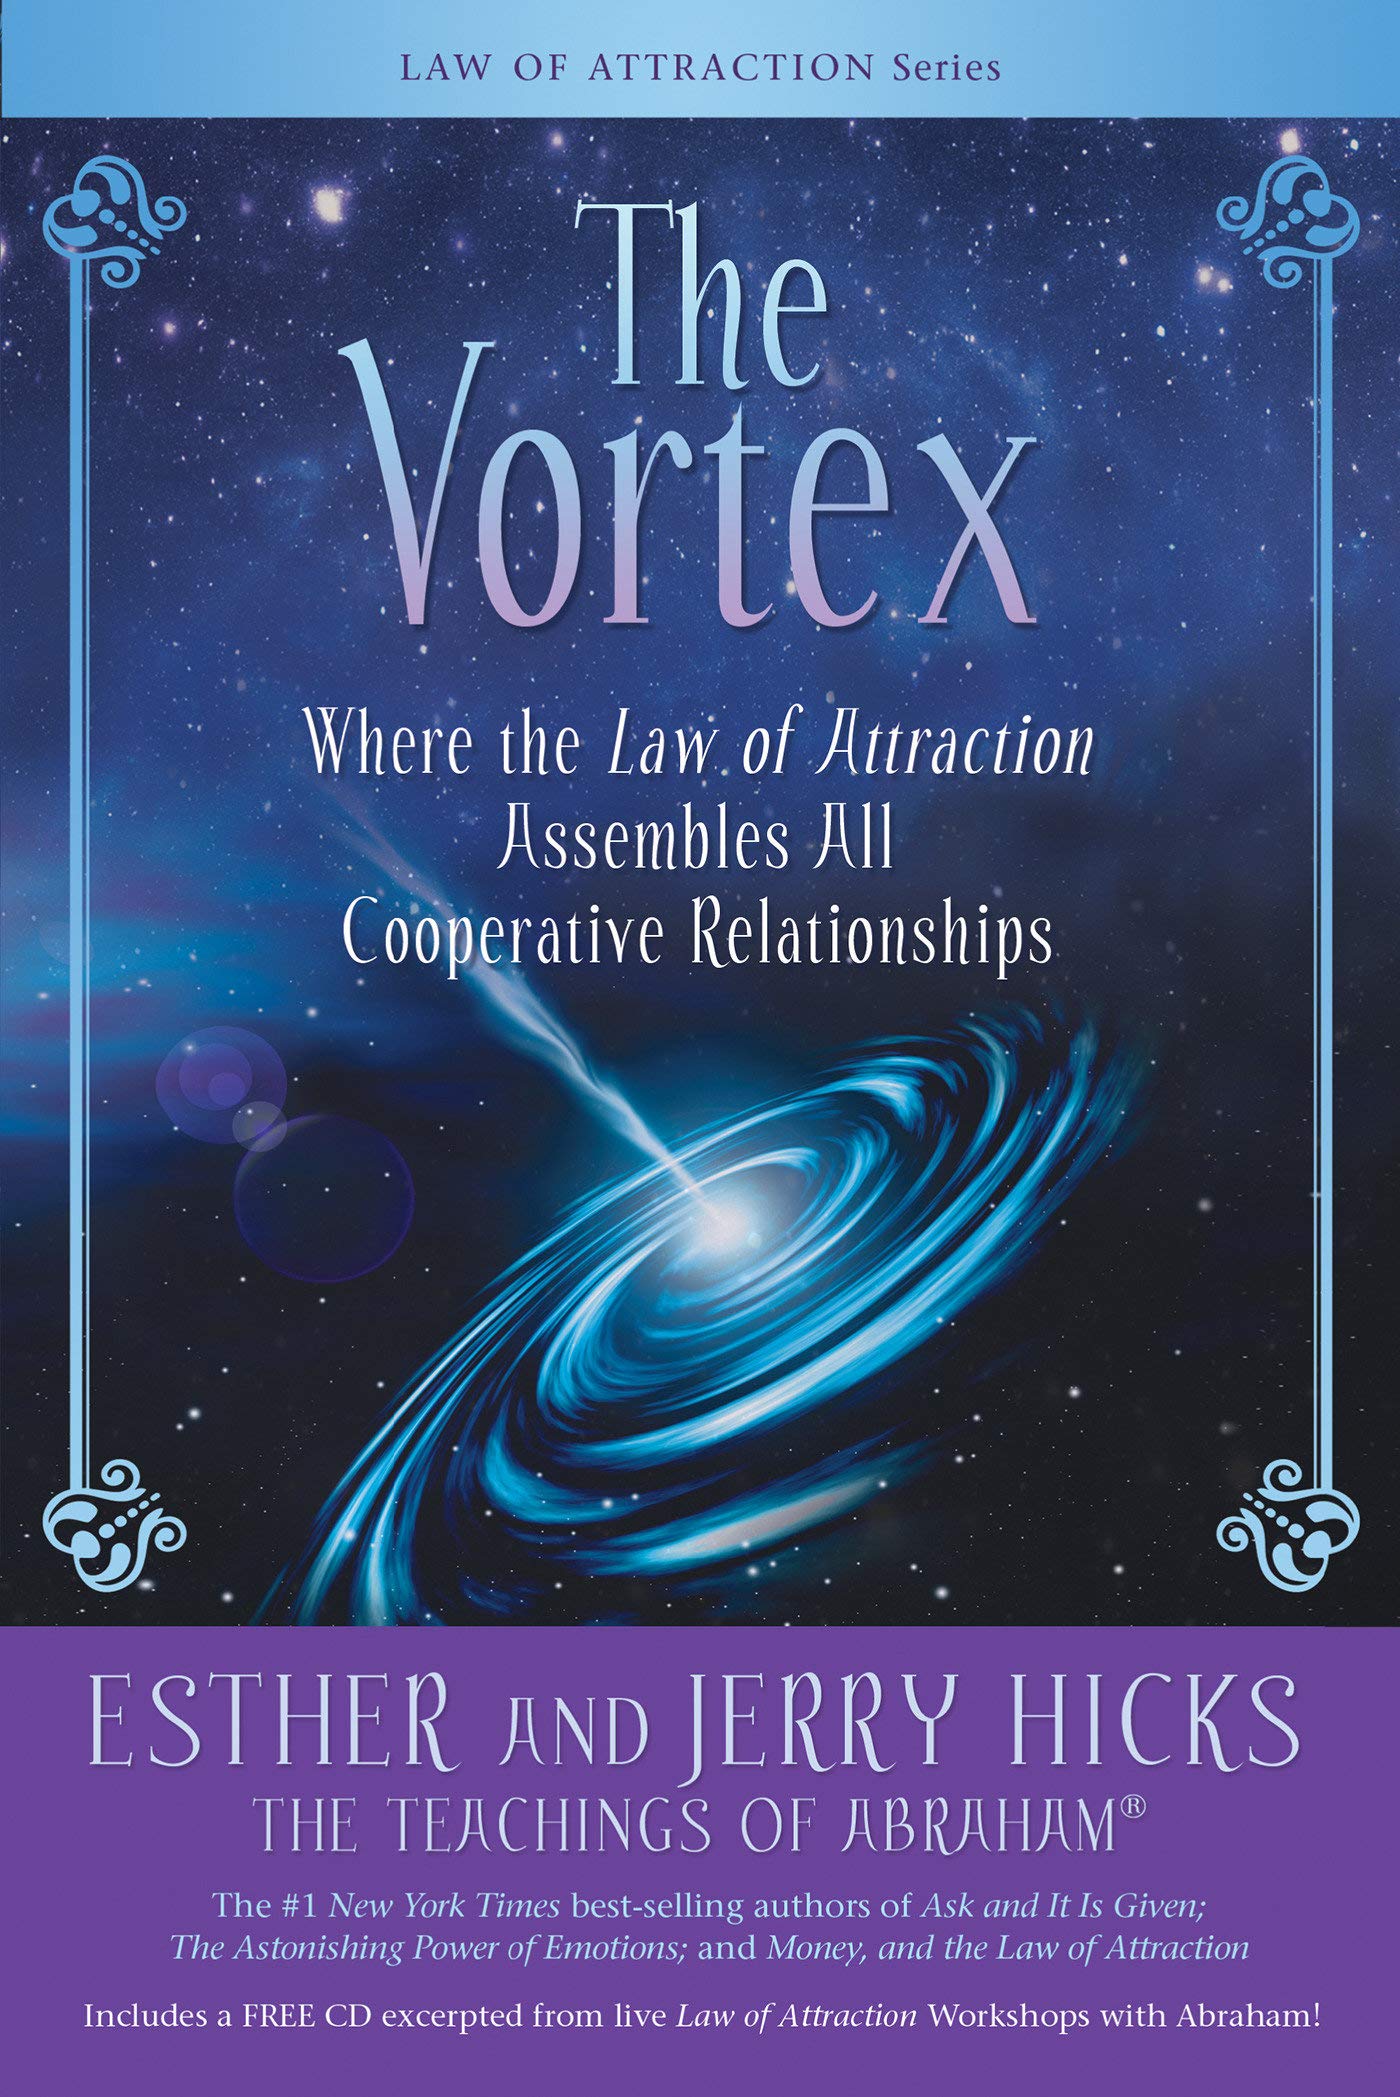 The Vortex: Where the Law of Attraction Assembles All Cooperative Relationships (Copy) (Copy)